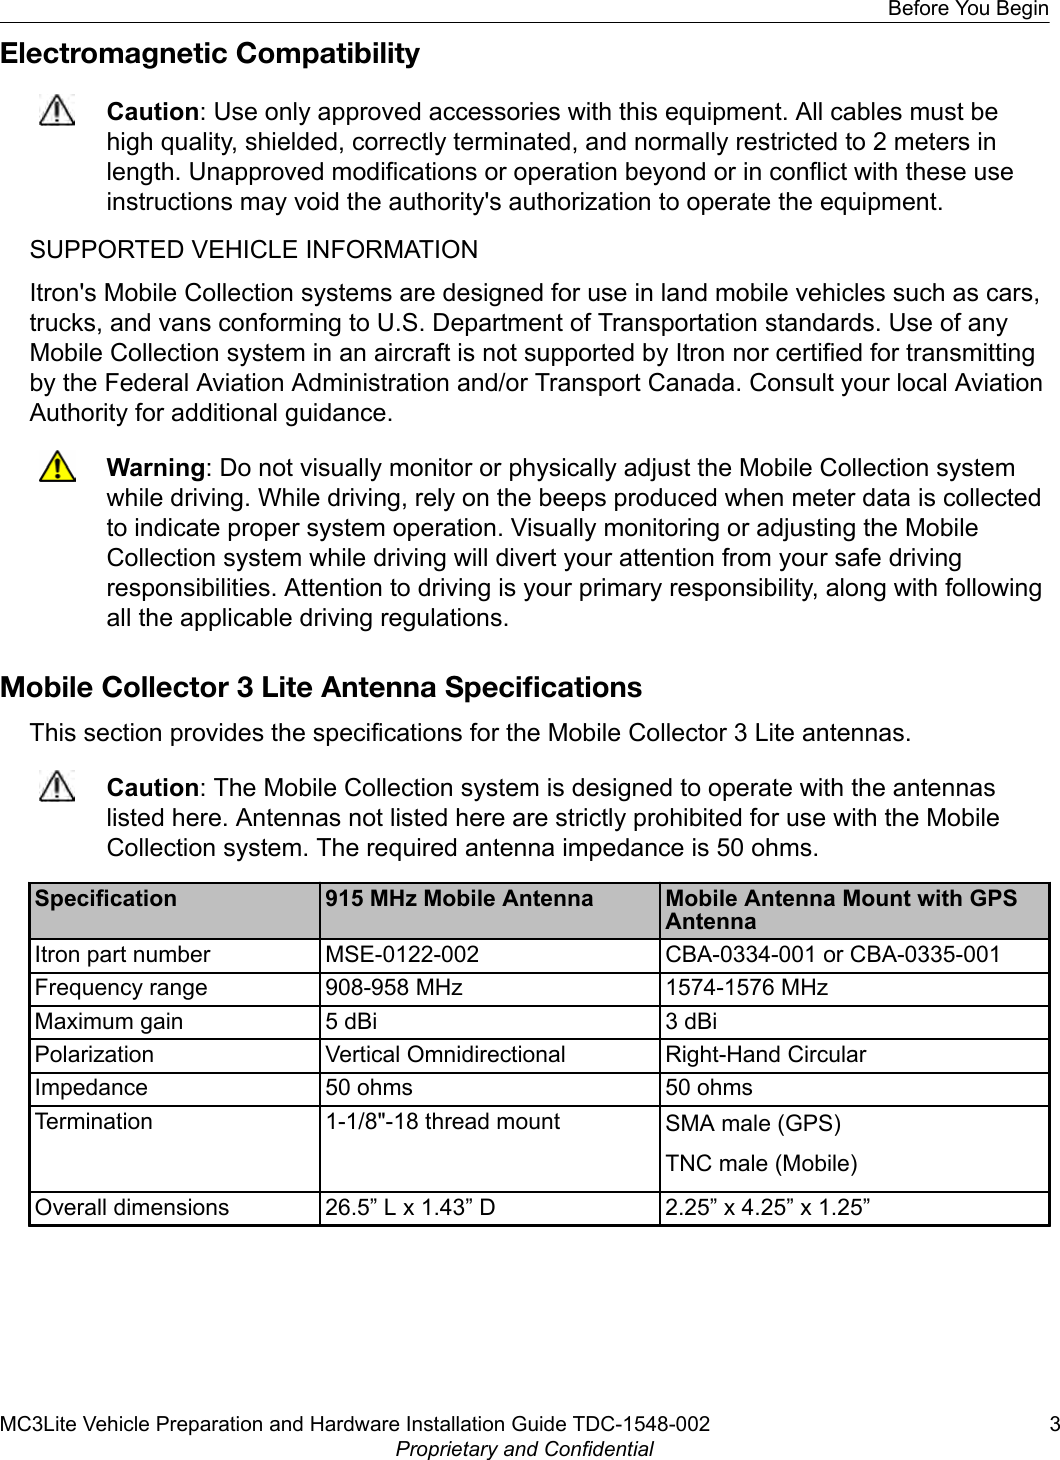 Electromagnetic CompatibilityCaution: Use only approved accessories with this equipment. All cables must behigh quality, shielded, correctly terminated, and normally restricted to 2 meters inlength. Unapproved modifications or operation beyond or in conflict with these useinstructions may void the authority&apos;s authorization to operate the equipment.SUPPORTED VEHICLE INFORMATIONItron&apos;s Mobile Collection systems are designed for use in land mobile vehicles such as cars,trucks, and vans conforming to U.S. Department of Transportation standards. Use of anyMobile Collection system in an aircraft is not supported by Itron nor certified for transmittingby the Federal Aviation Administration and/or Transport Canada. Consult your local AviationAuthority for additional guidance.Warning: Do not visually monitor or physically adjust the Mobile Collection systemwhile driving. While driving, rely on the beeps produced when meter data is collectedto indicate proper system operation. Visually monitoring or adjusting the MobileCollection system while driving will divert your attention from your safe drivingresponsibilities. Attention to driving is your primary responsibility, along with followingall the applicable driving regulations.Mobile Collector 3 Lite Antenna SpeciﬁcationsThis section provides the specifications for the Mobile Collector 3 Lite antennas.Caution: The Mobile Collection system is designed to operate with the antennaslisted here. Antennas not listed here are strictly prohibited for use with the MobileCollection system. The required antenna impedance is 50 ohms.Specification 915 MHz Mobile Antenna Mobile Antenna Mount with GPSAntennaItron part number MSE-0122-002 CBA-0334-001 or CBA-0335-001Frequency range 908-958 MHz 1574-1576 MHzMaximum gain 5 dBi 3 dBiPolarization Vertical Omnidirectional Right-Hand CircularImpedance 50 ohms 50 ohmsTermination 1-1/8&quot;-18 thread mount SMA male (GPS)TNC male (Mobile)Overall dimensions 26.5” L x 1.43” D 2.25” x 4.25” x 1.25”Before You BeginMC3Lite Vehicle Preparation and Hardware Installation Guide TDC-1548-002 3Proprietary and Confidential